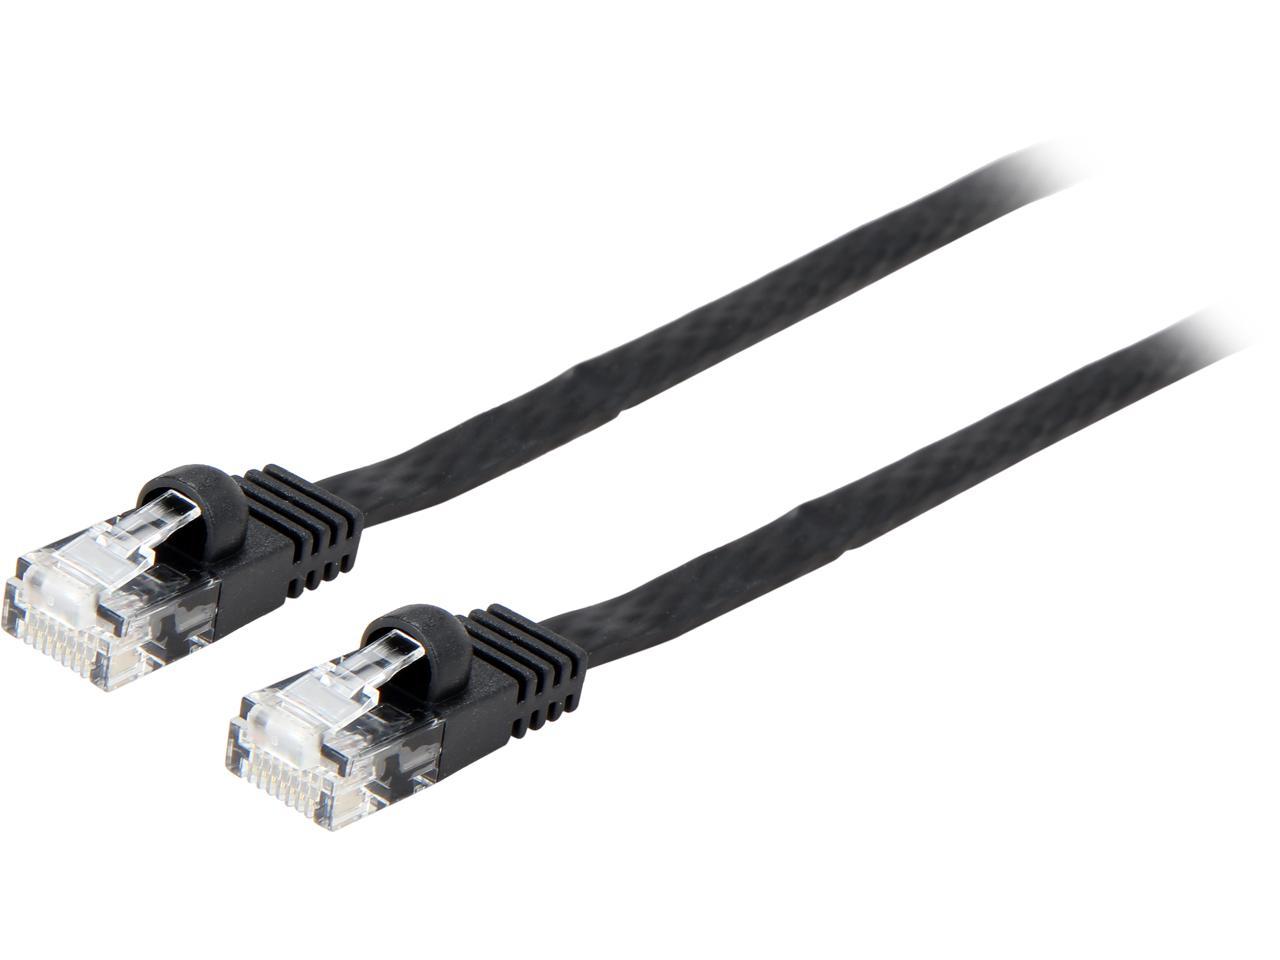 Rosewill RCNC-18008 Cable Ethernet plano Cat 6 de 100 pies con pinzas para cables negro